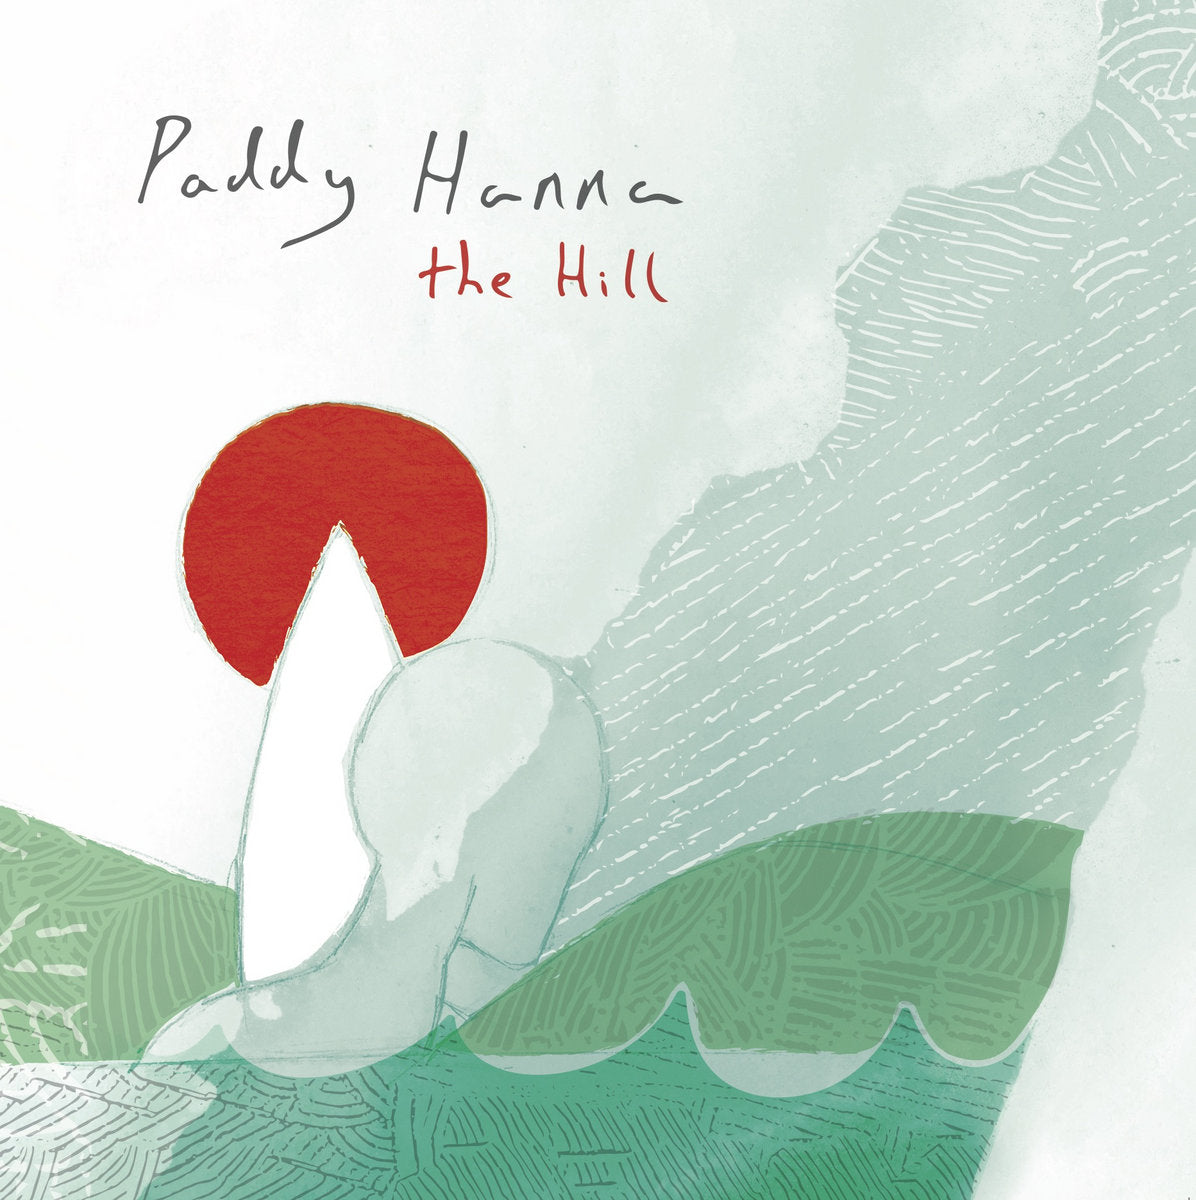 PADDY HANNA – The Hill – LP – Limited White Vinyl